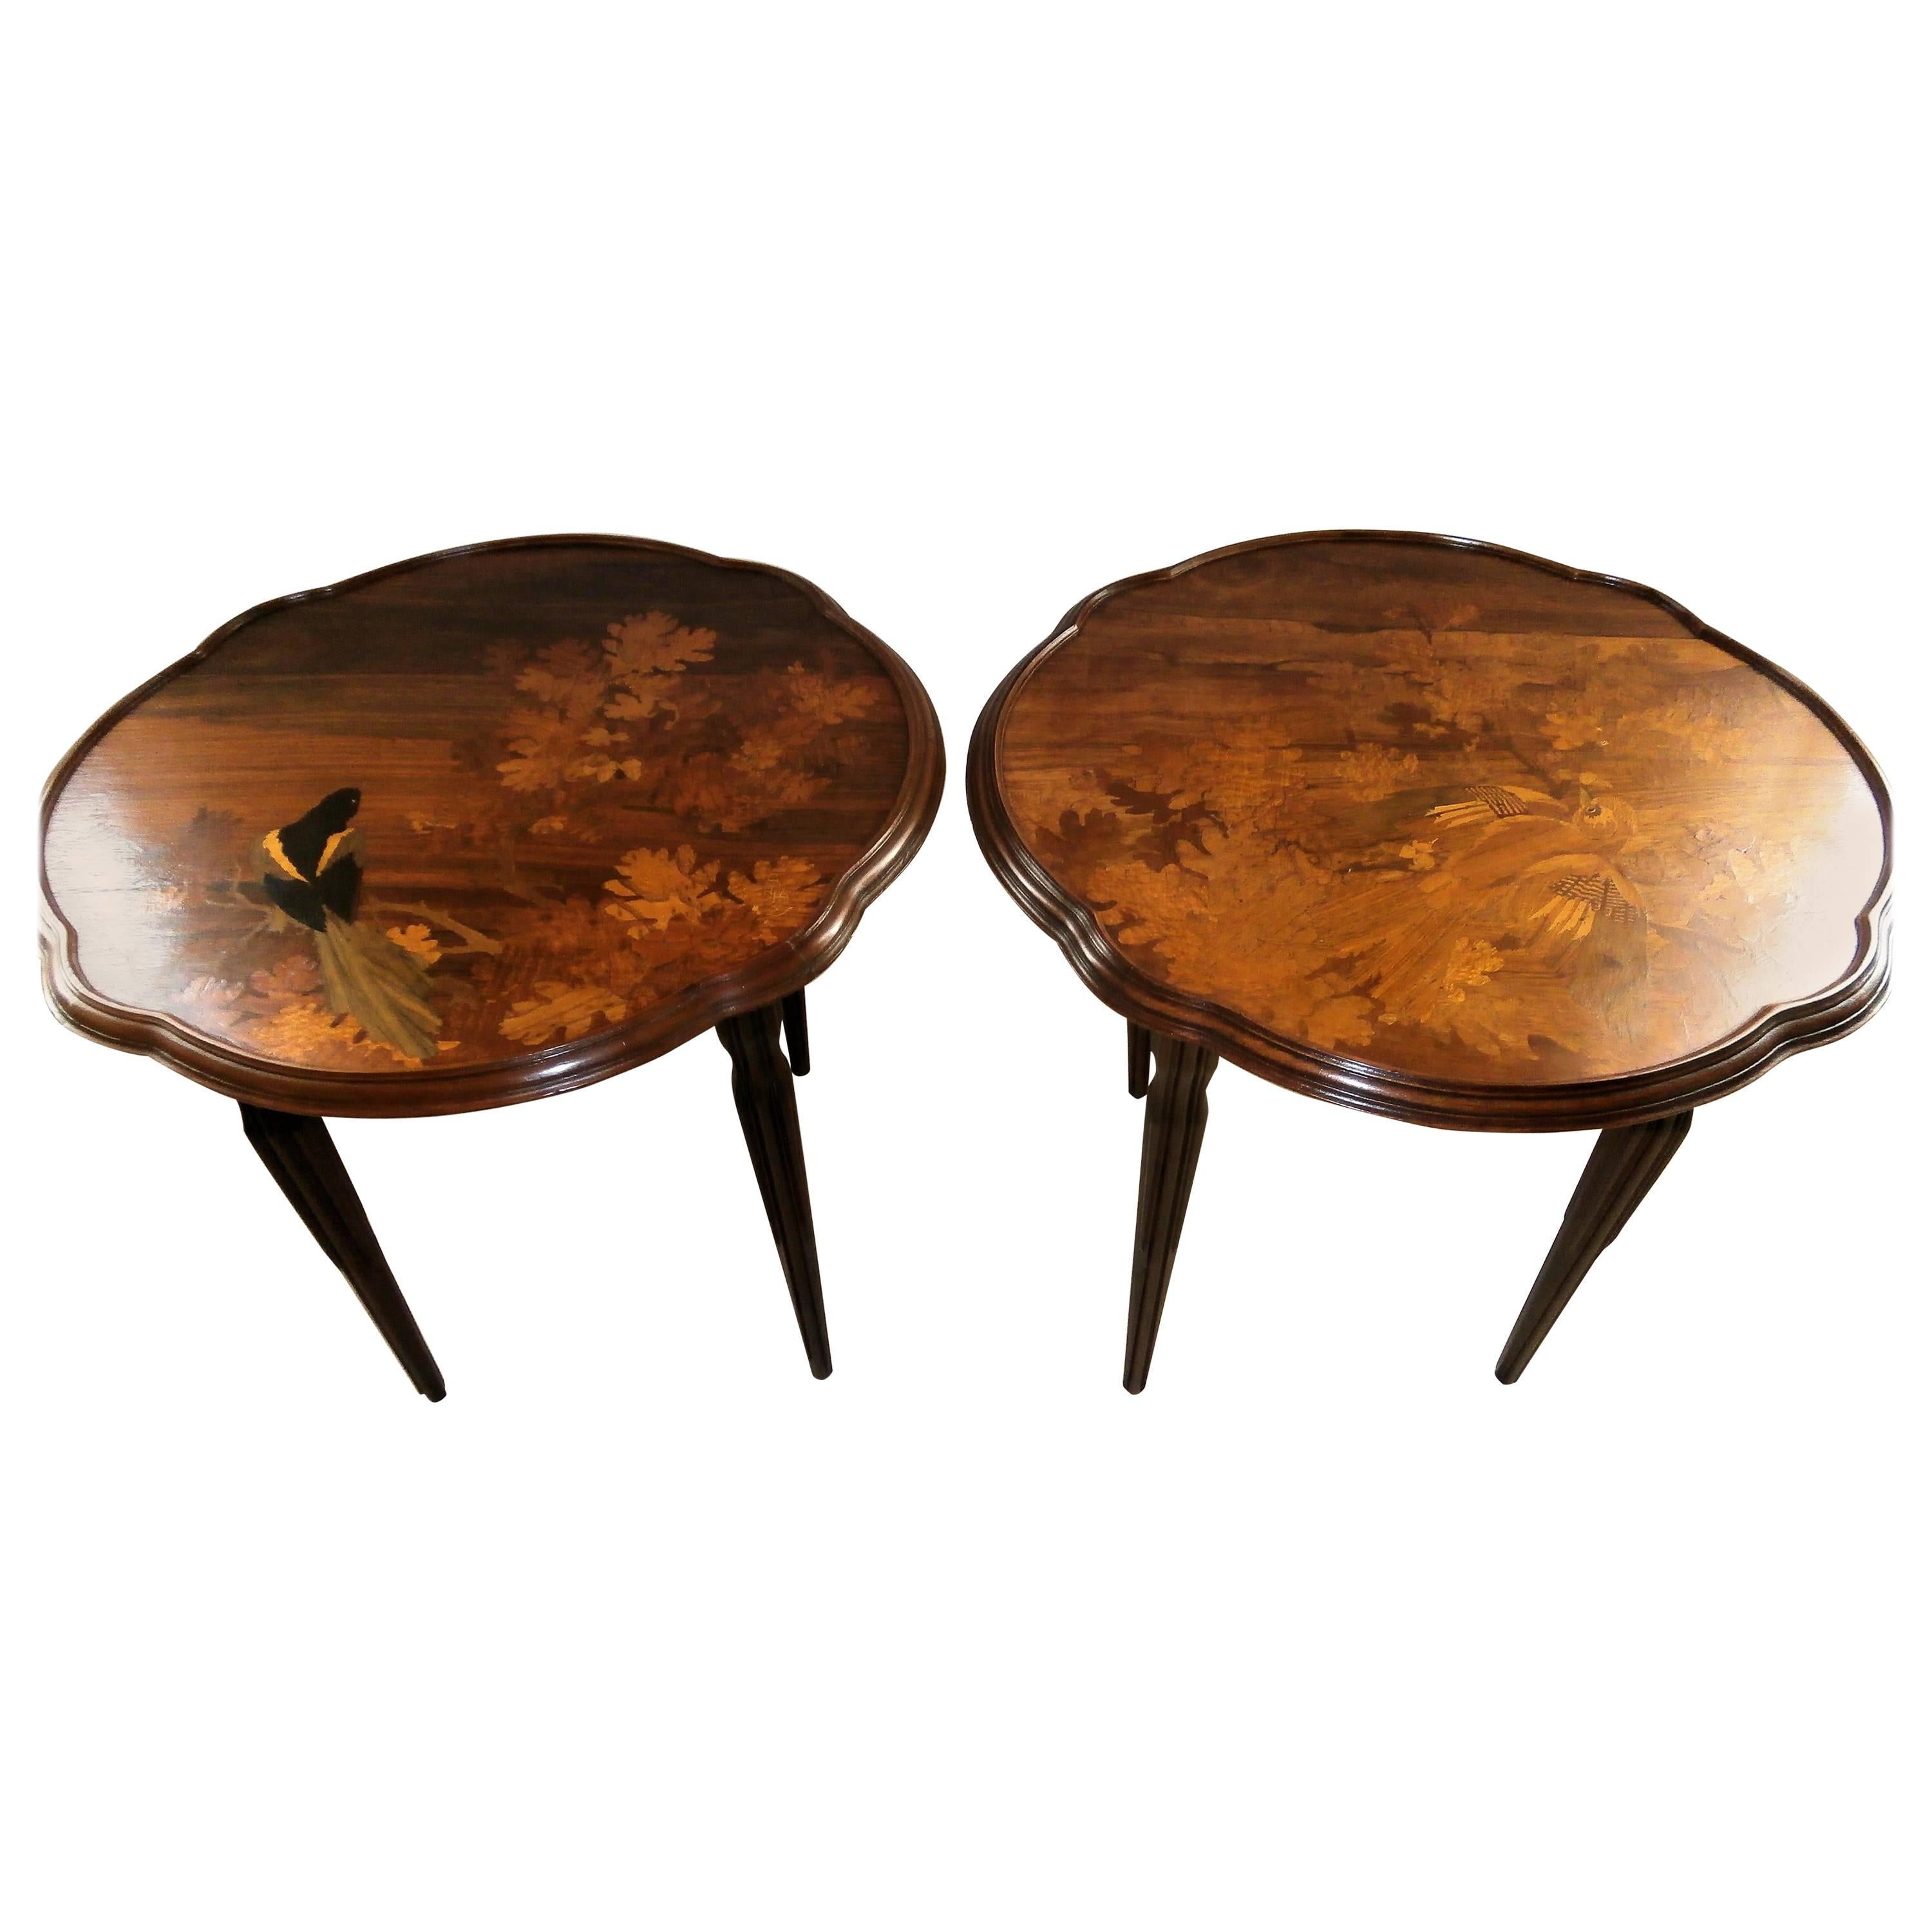 Stunning Art Nouveau Pair of Marquetry Tables Signed by Gallé